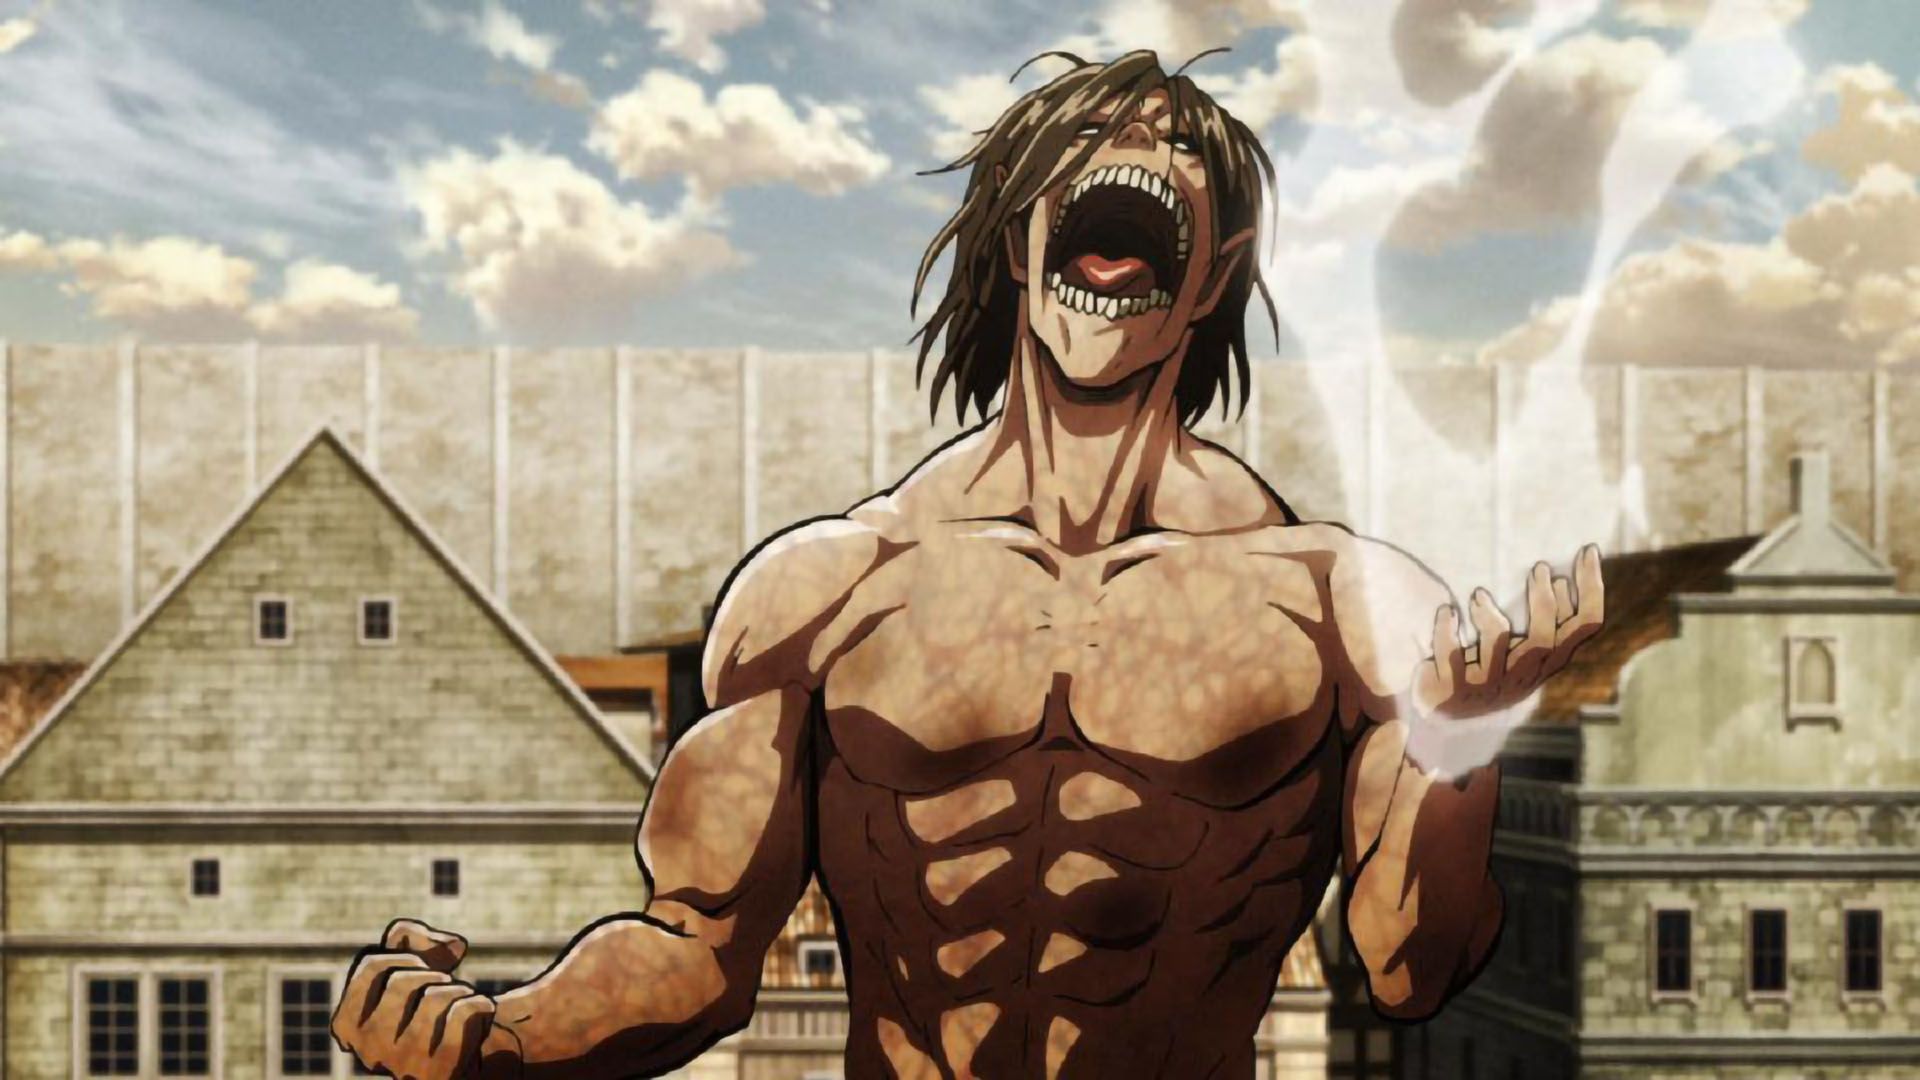 What You May Not Know About Attack On Titan